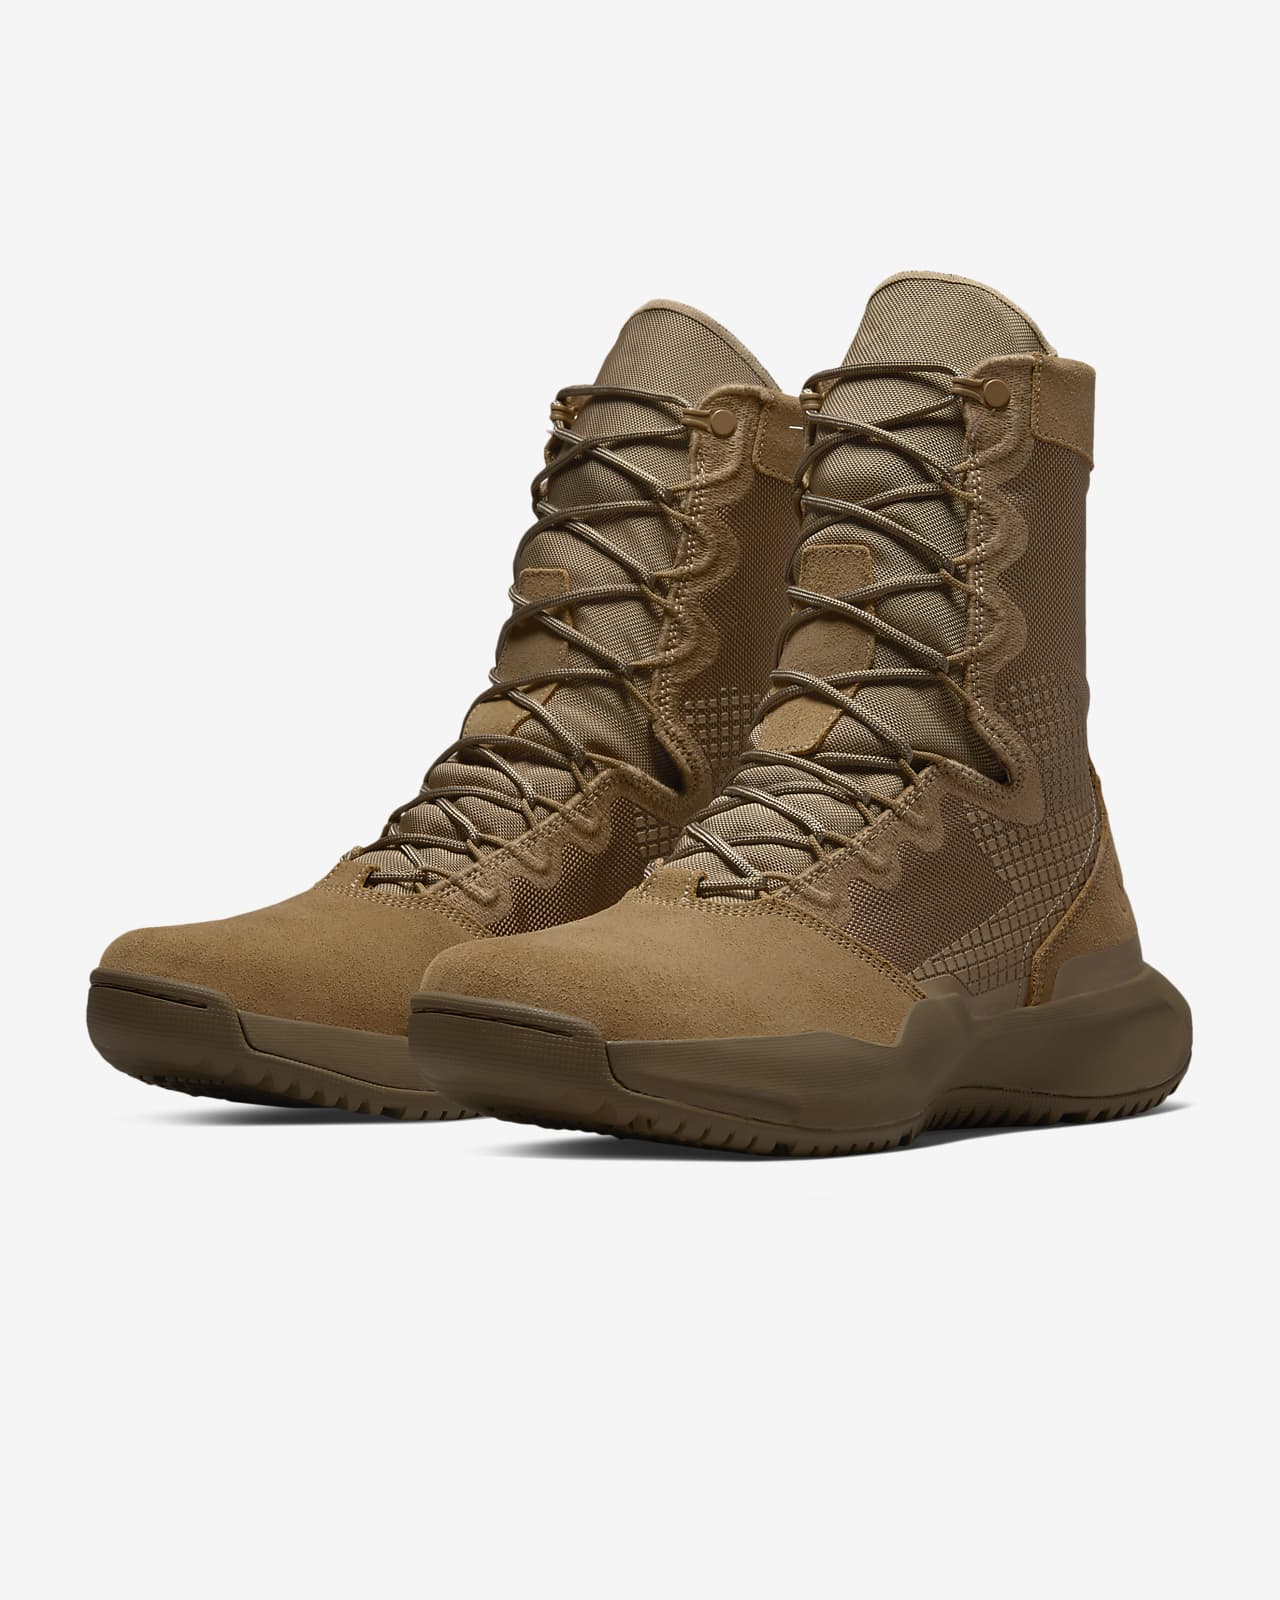 Almighty equal bison Nike SFB B1 Tactical Boot. Nike.com